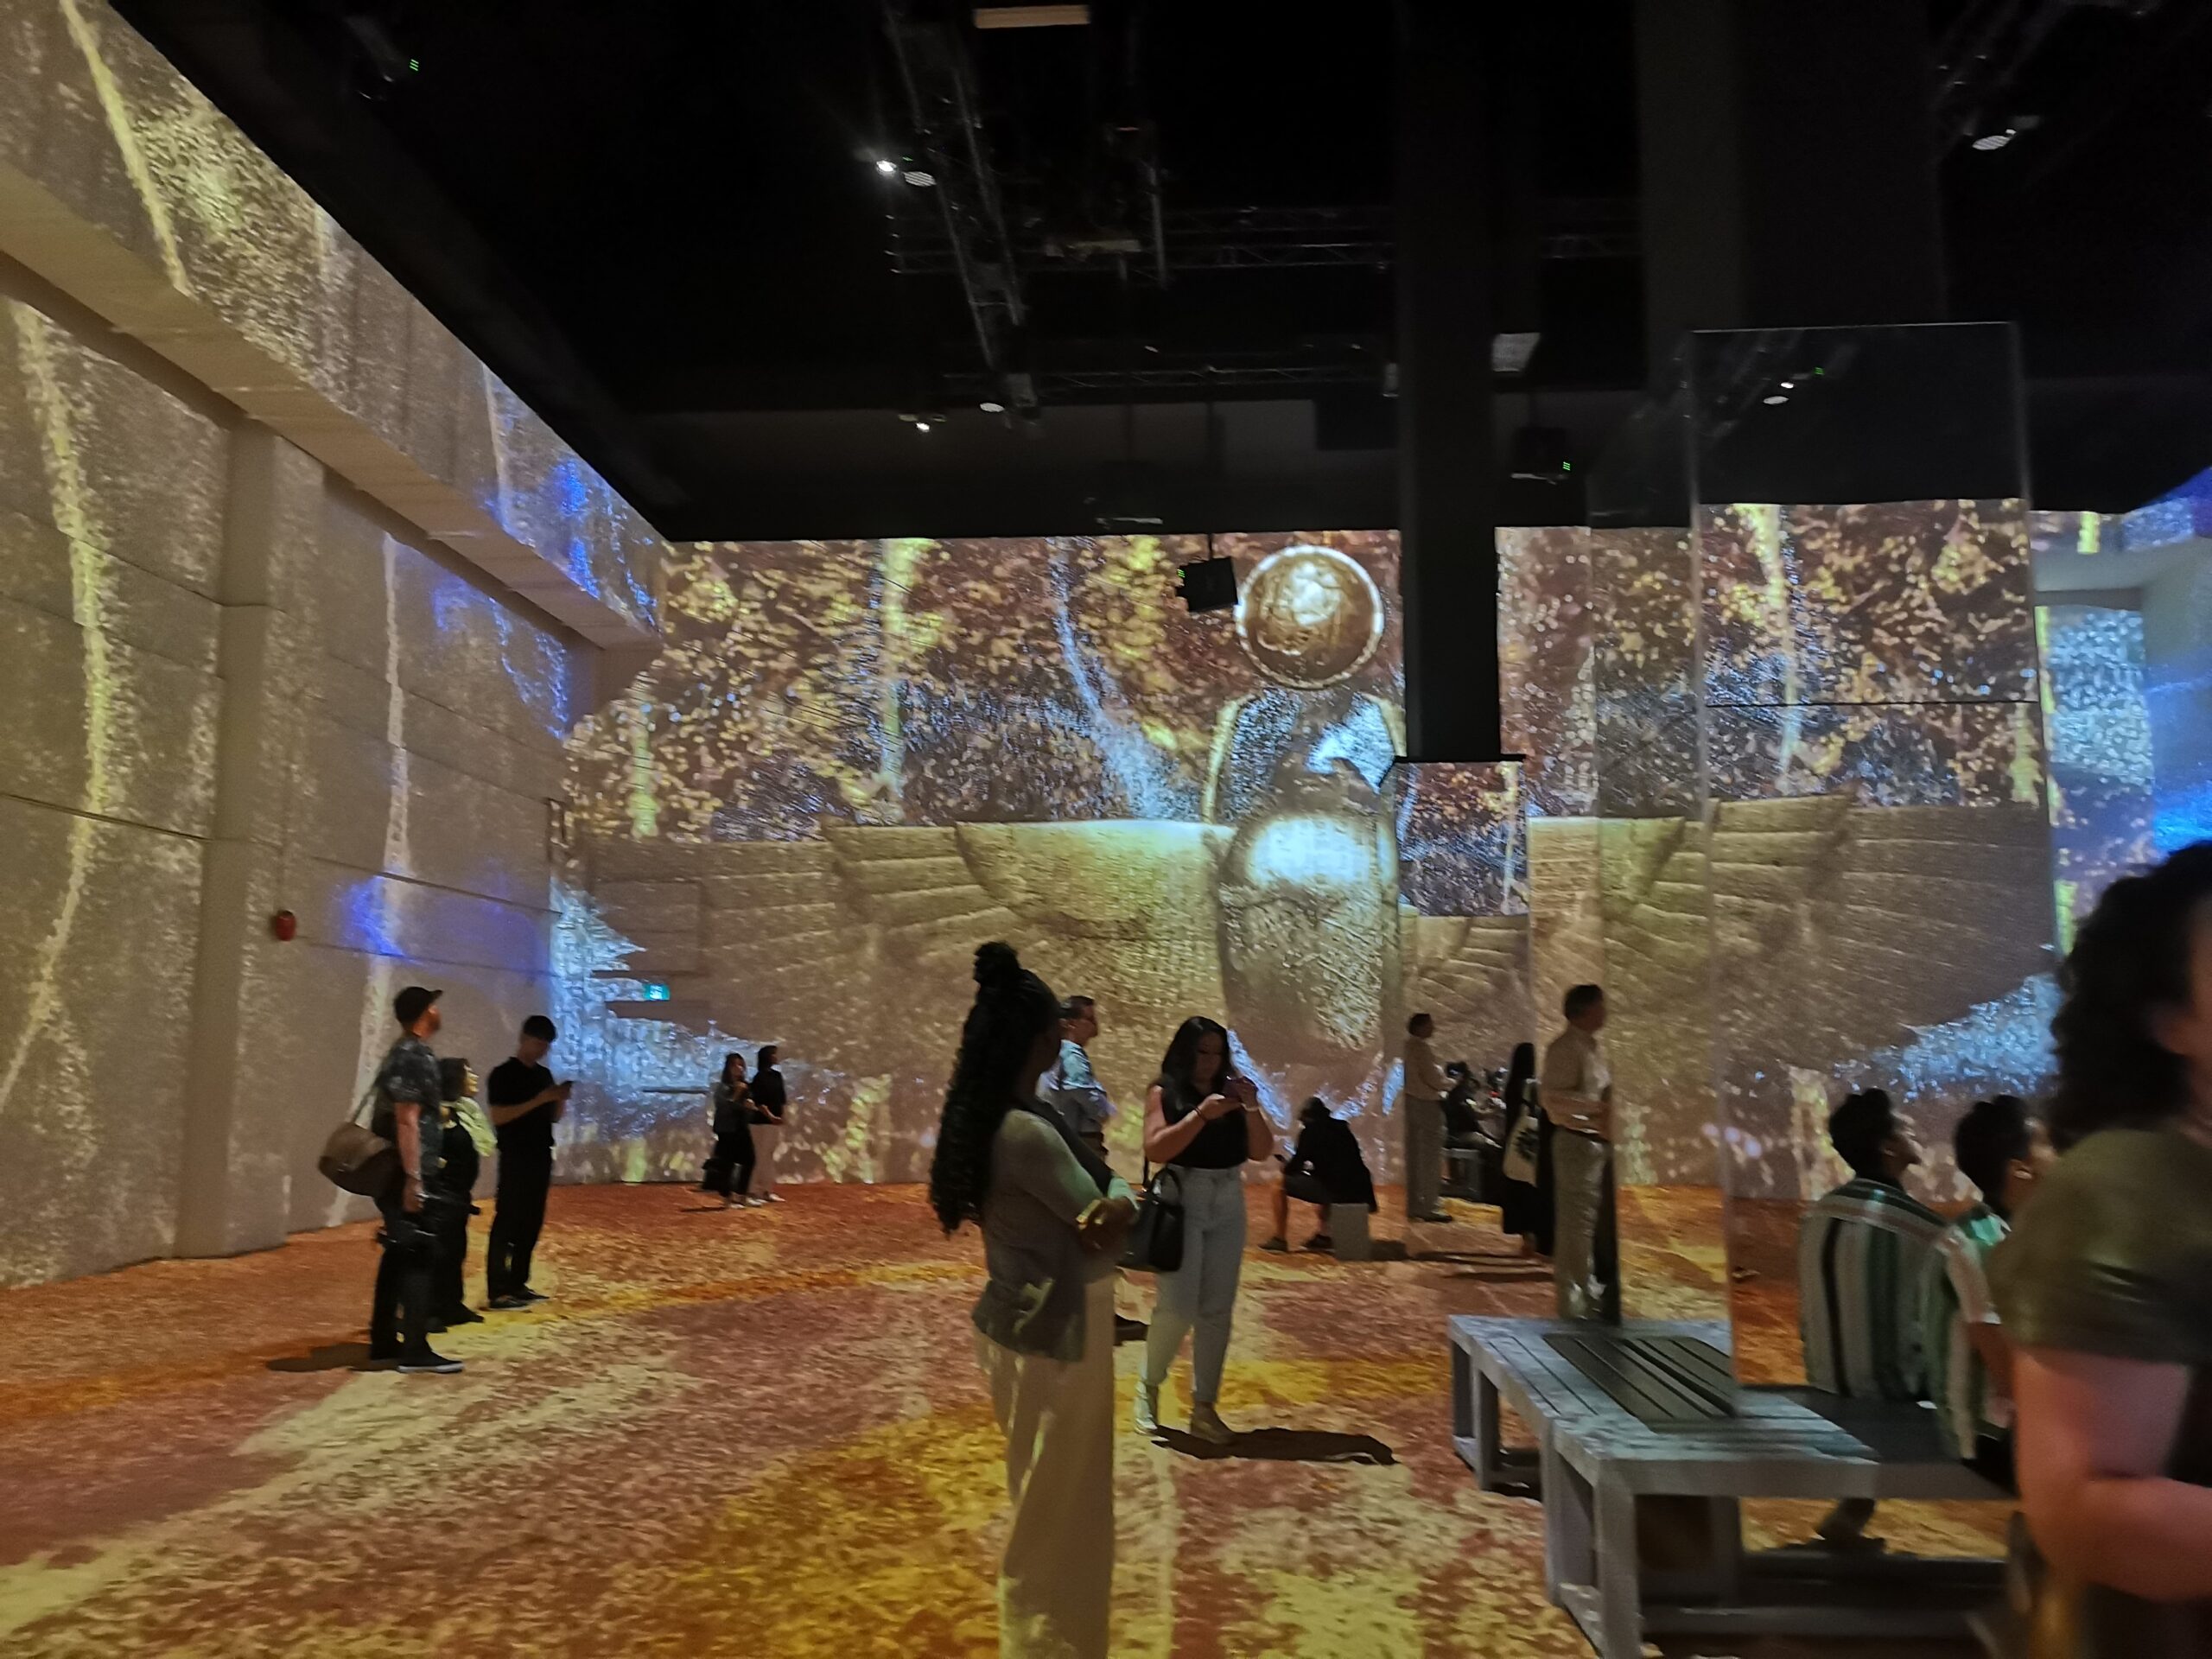 Image of Immersive Tut with the other media press that attended the event.